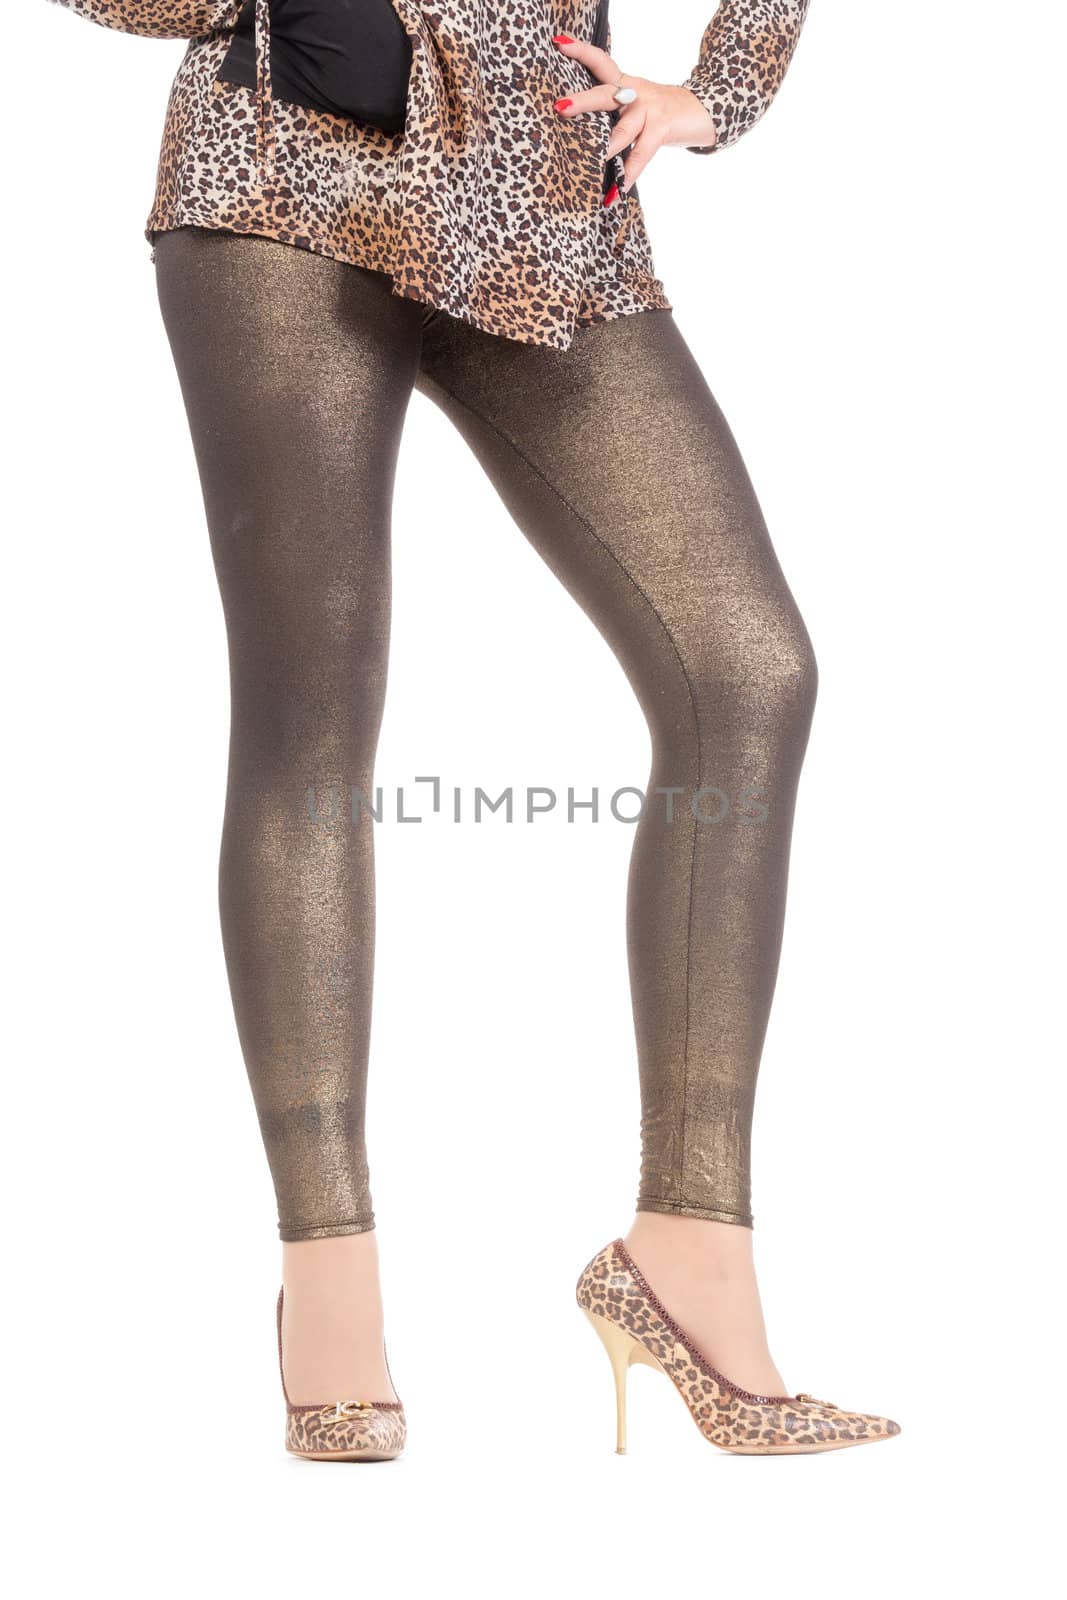 Cropped view image of a woman's sexy legs clad in shimmering golden leggins and stilettos